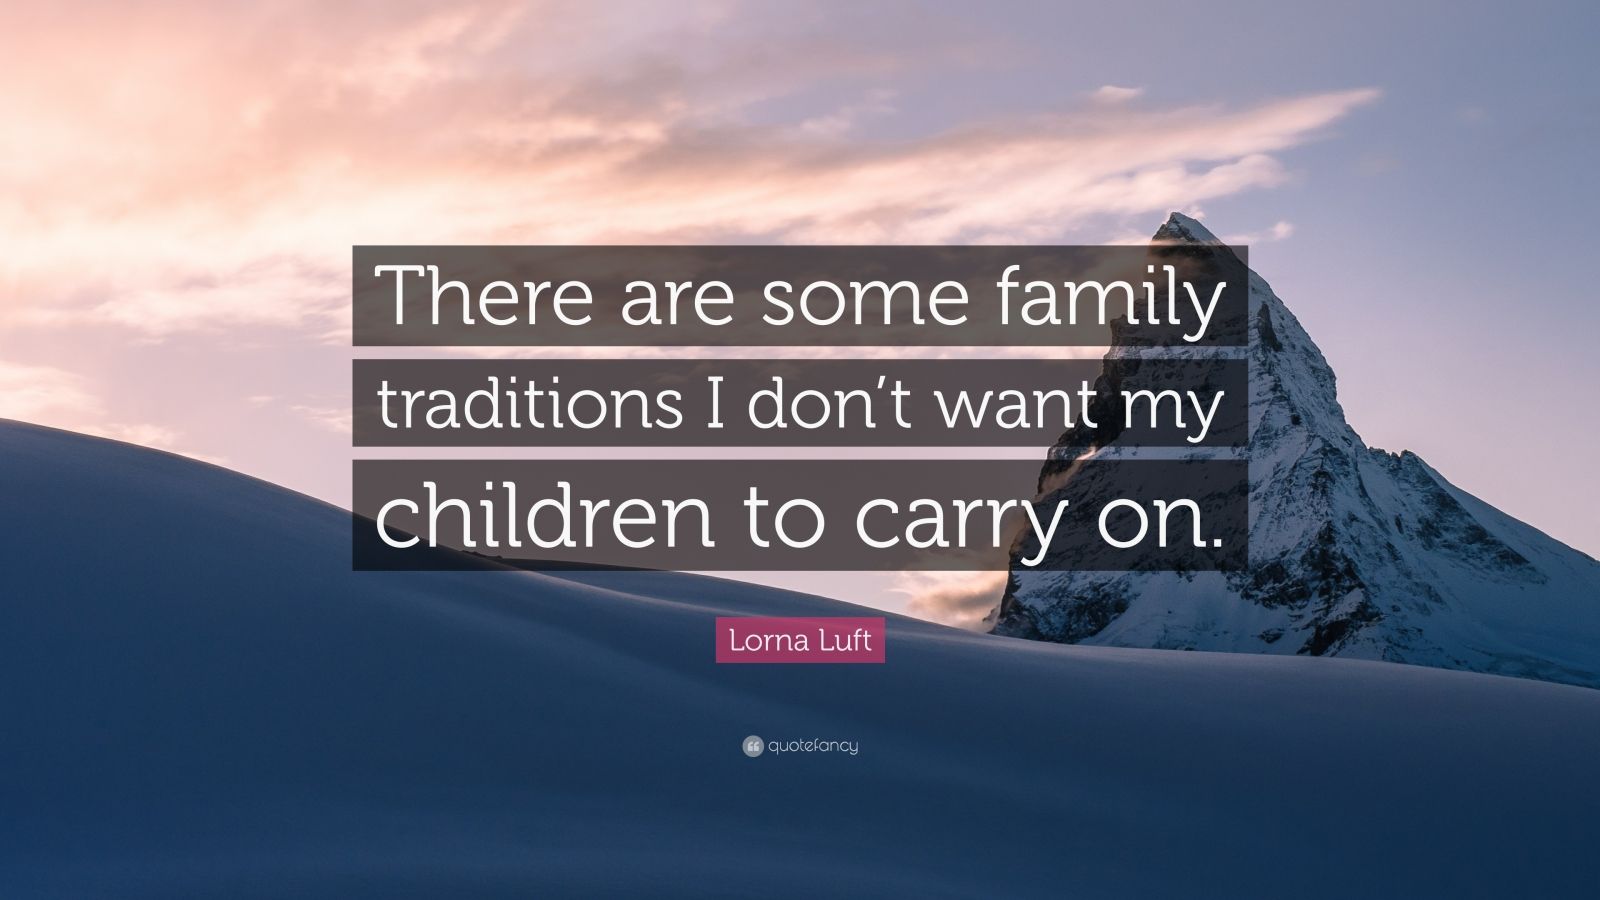 Lorna Luft Quote: “There are some family traditions I don’t want my